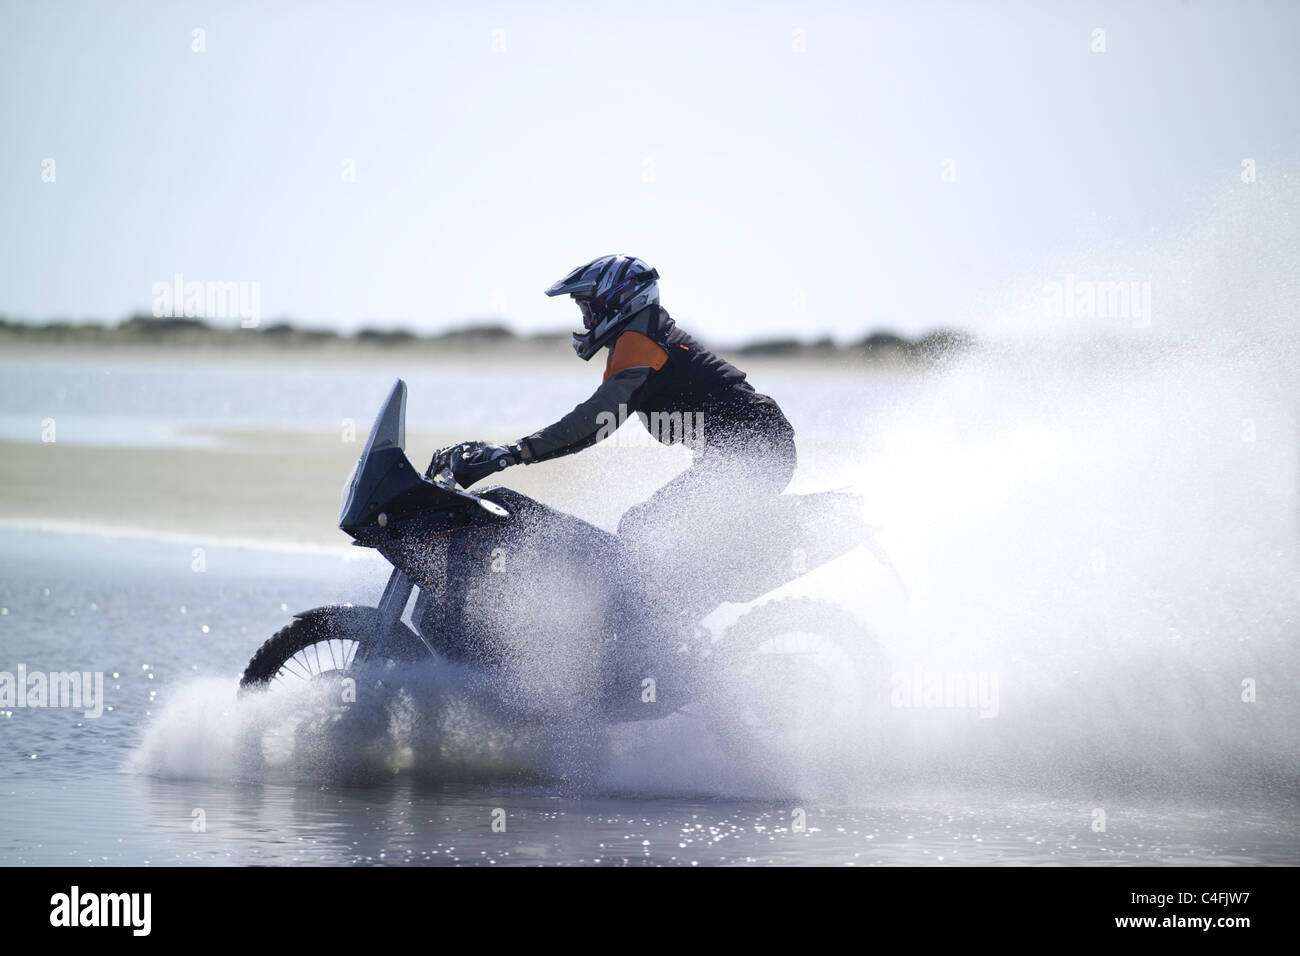 Motorcyclist driving through water Stock Photo